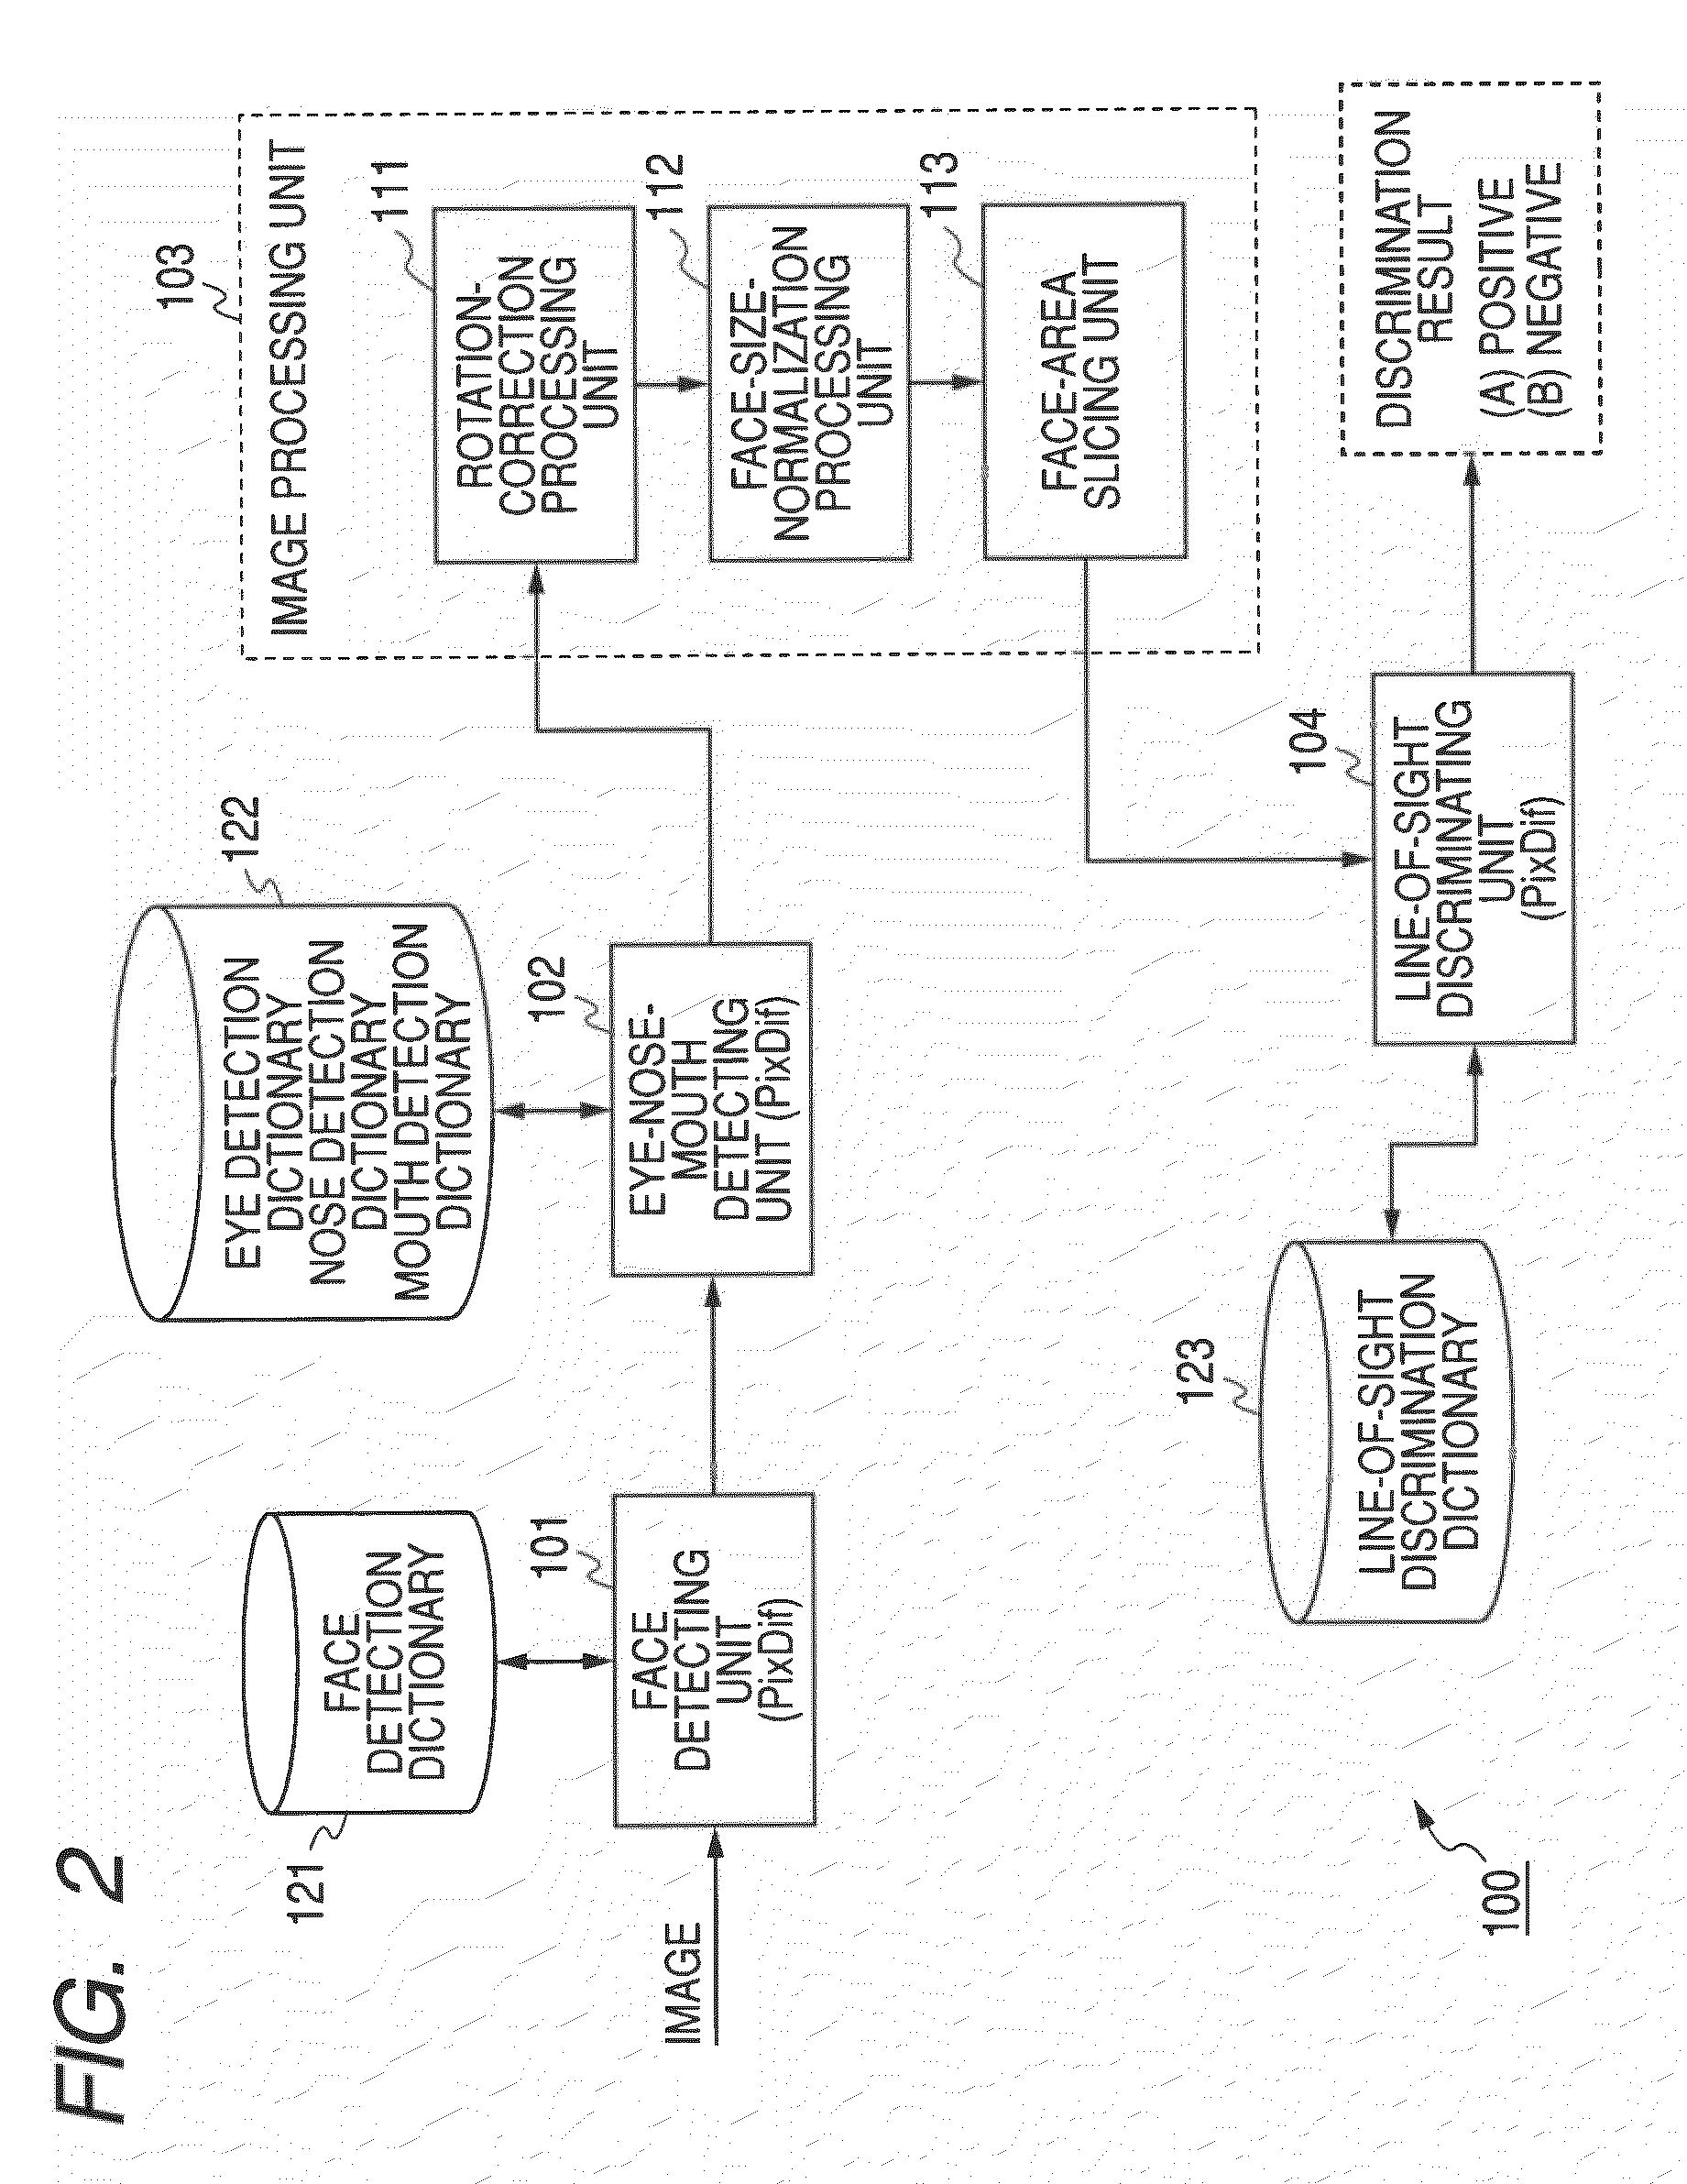 Apparatus and method for determining line-of-sight direction in a face image and controlling camera operations therefrom